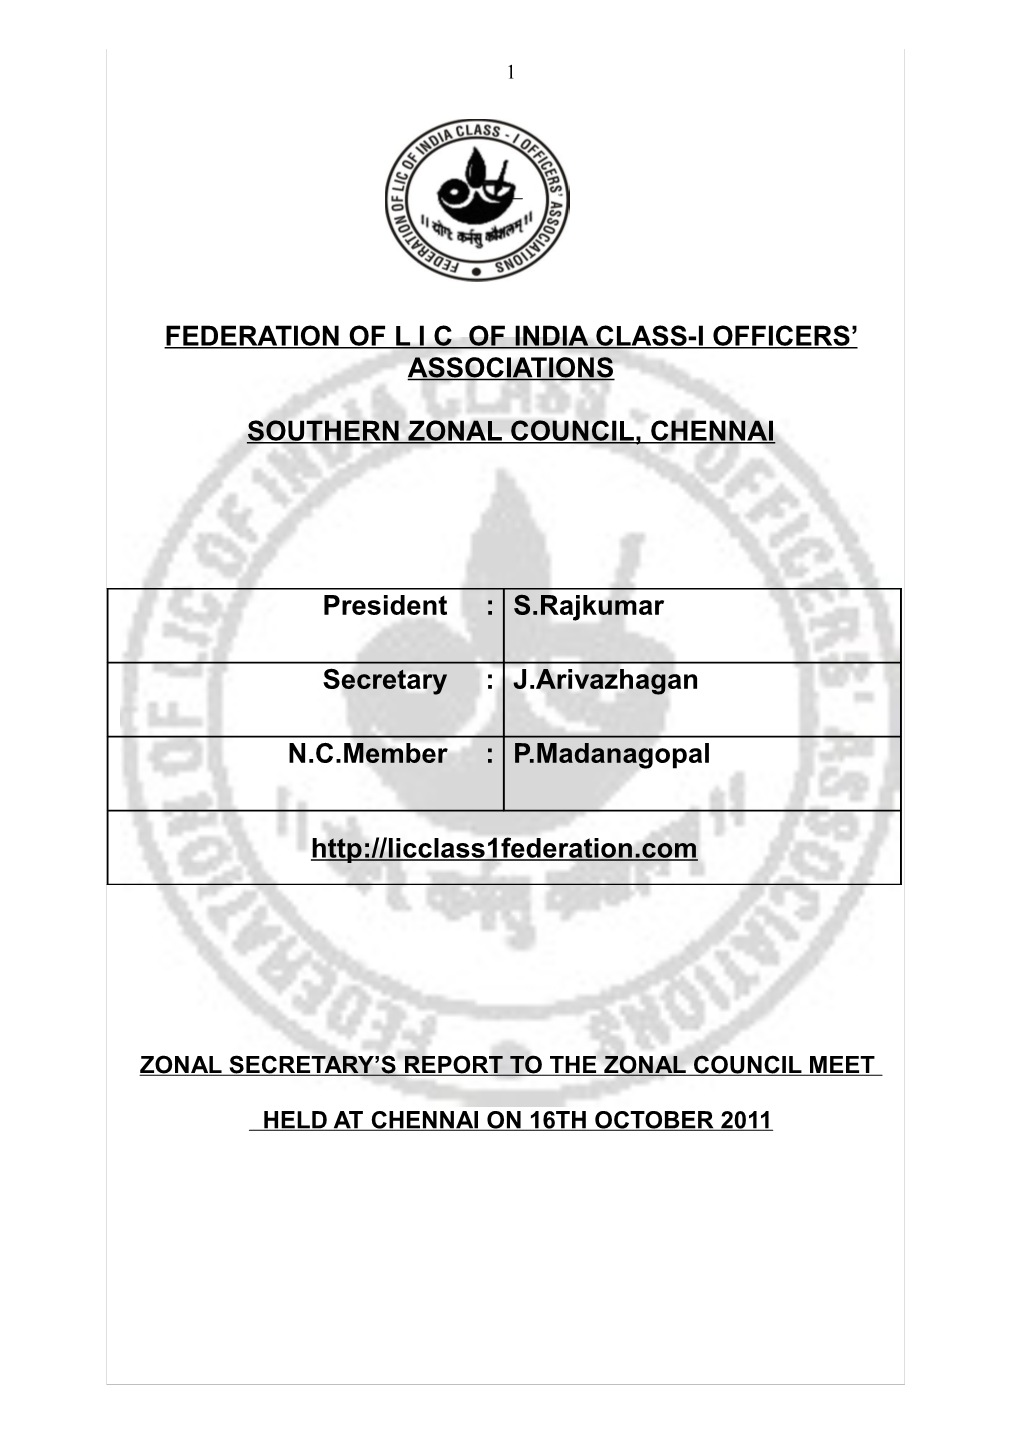 Federation of Lic Class-I Officers' Associations